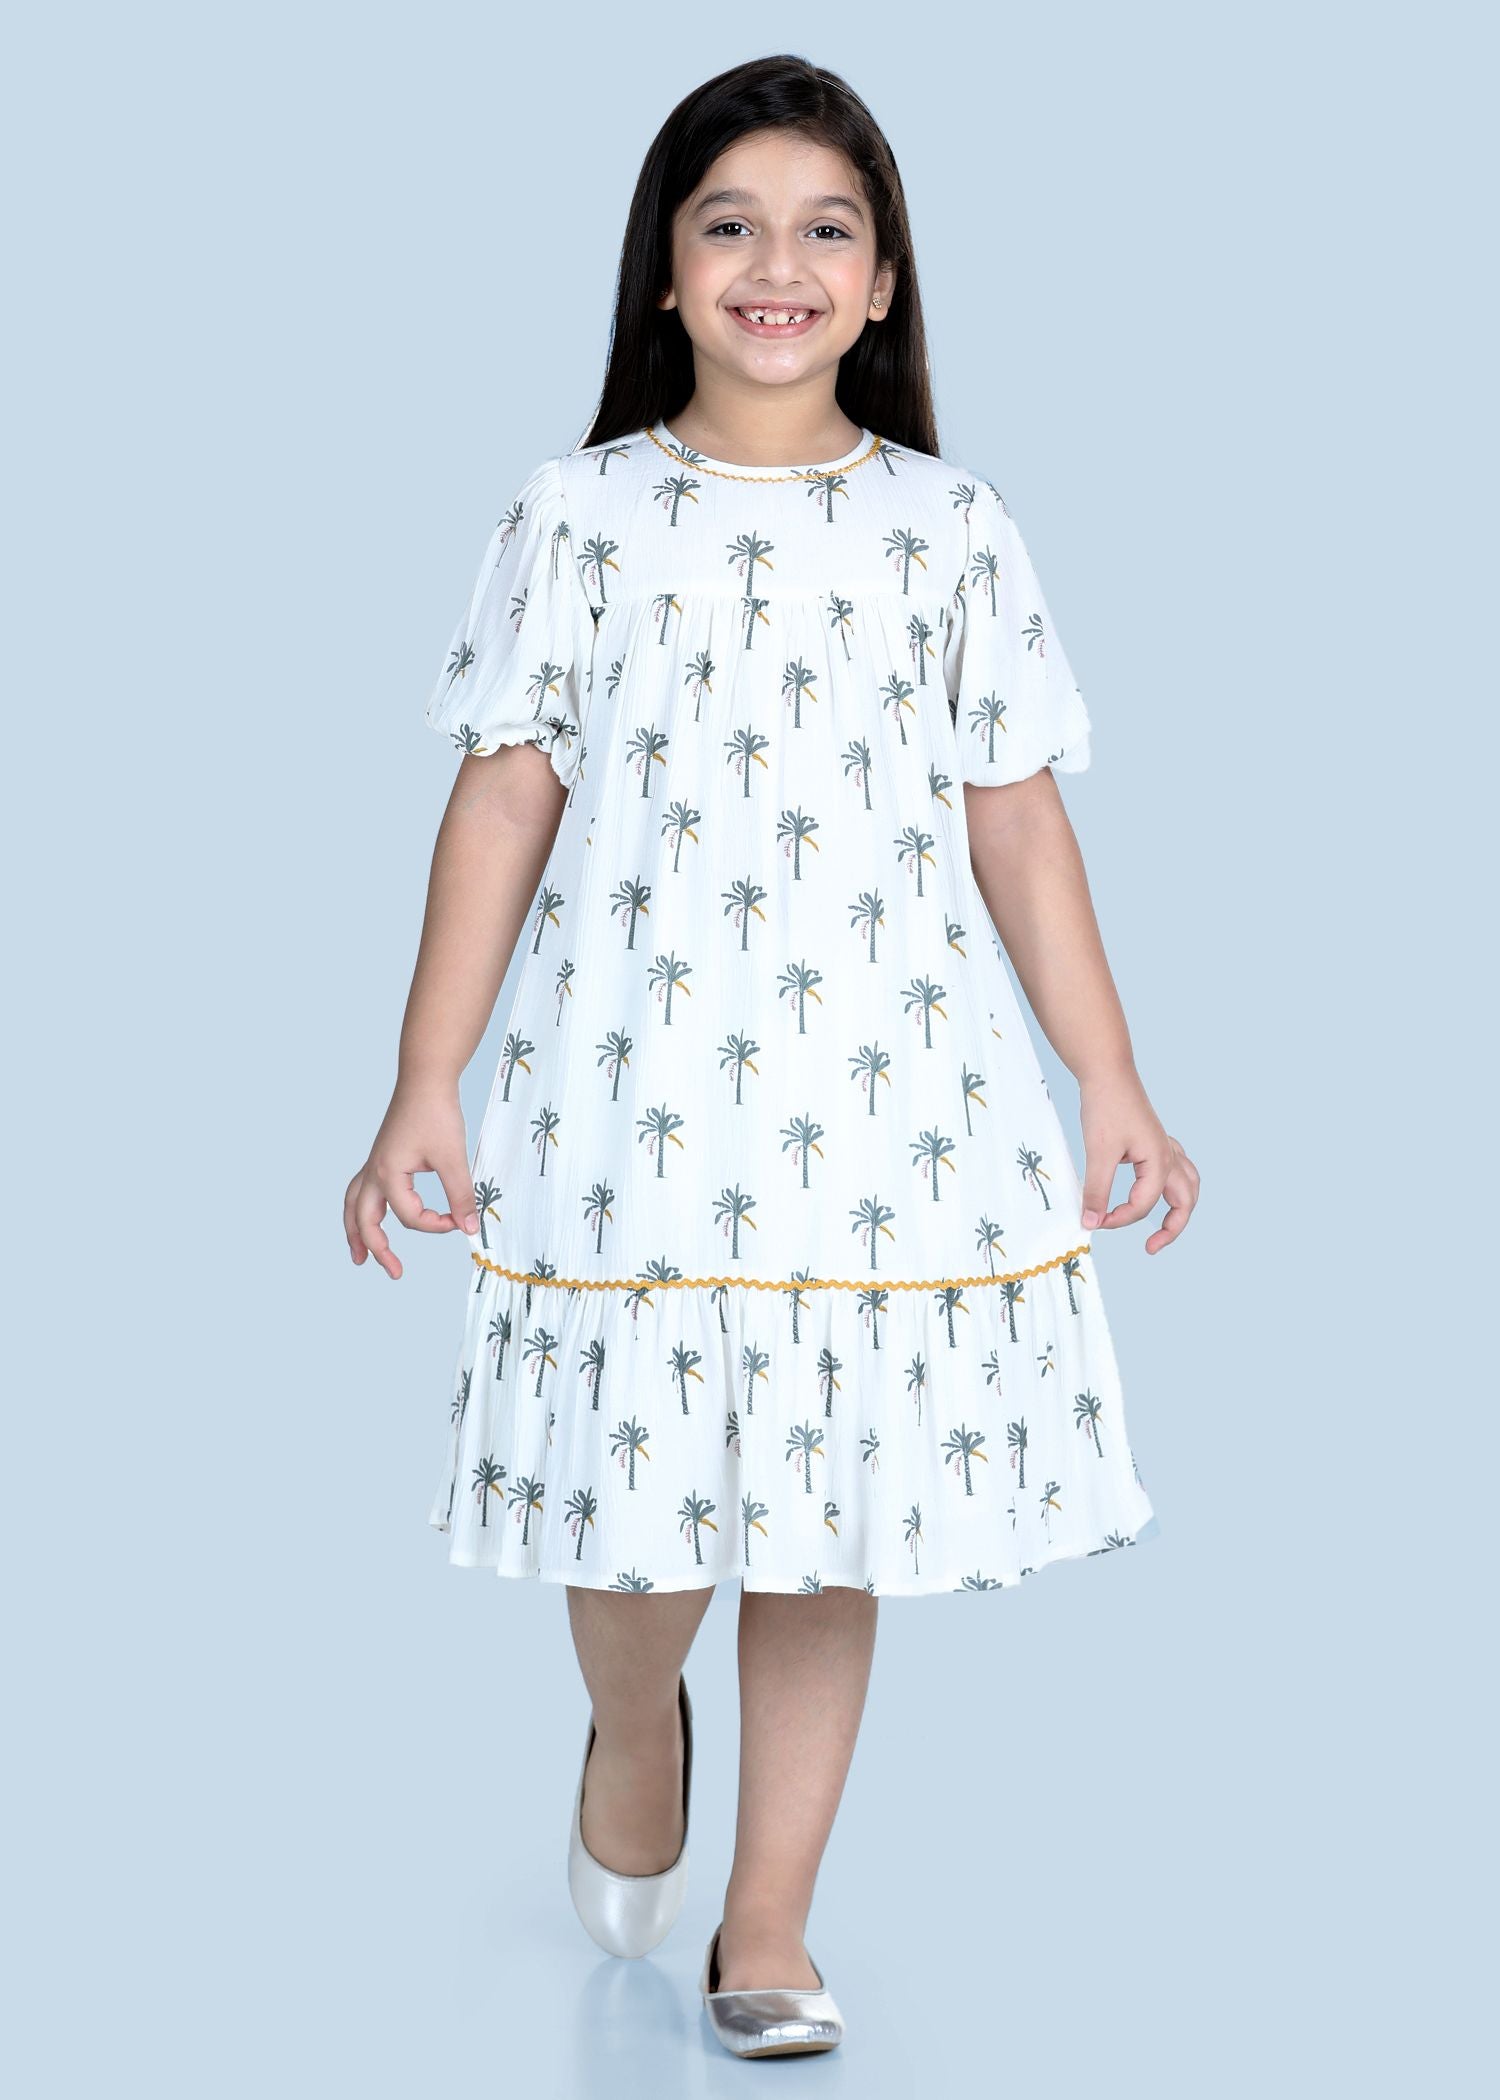 white frock designs for kids